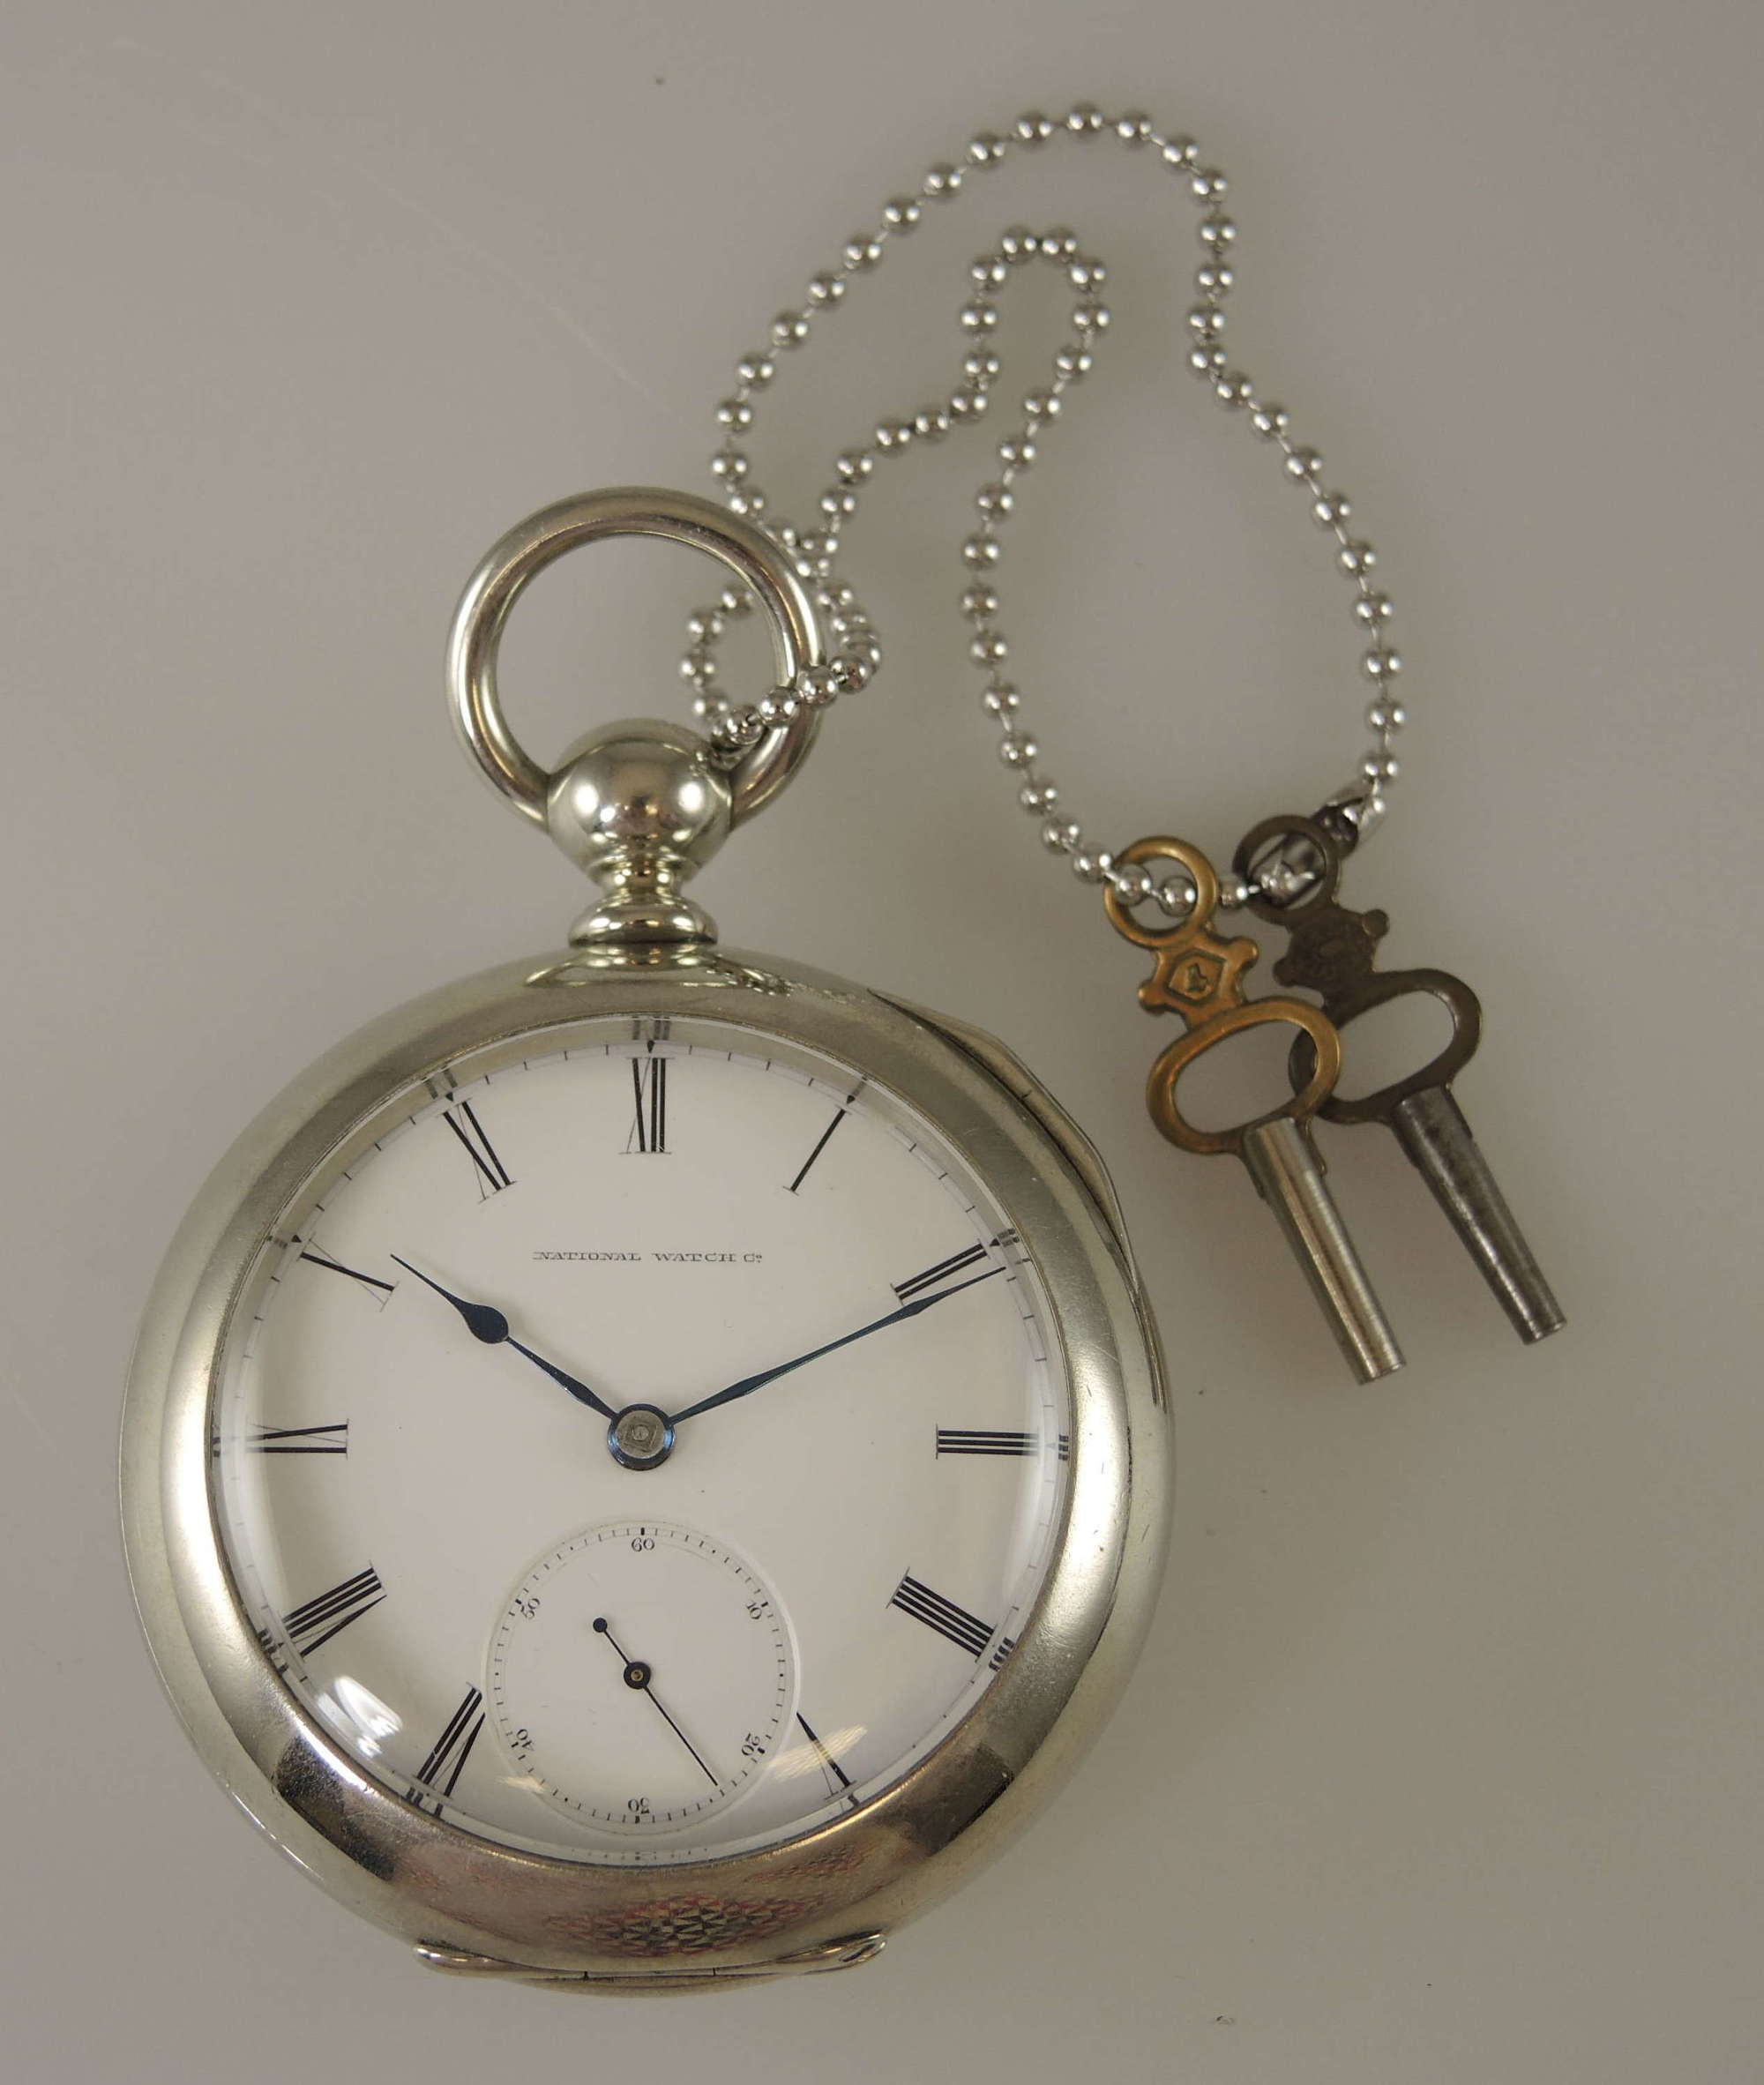 18s private label Elgin pocket watch with pierced watch cock c1873